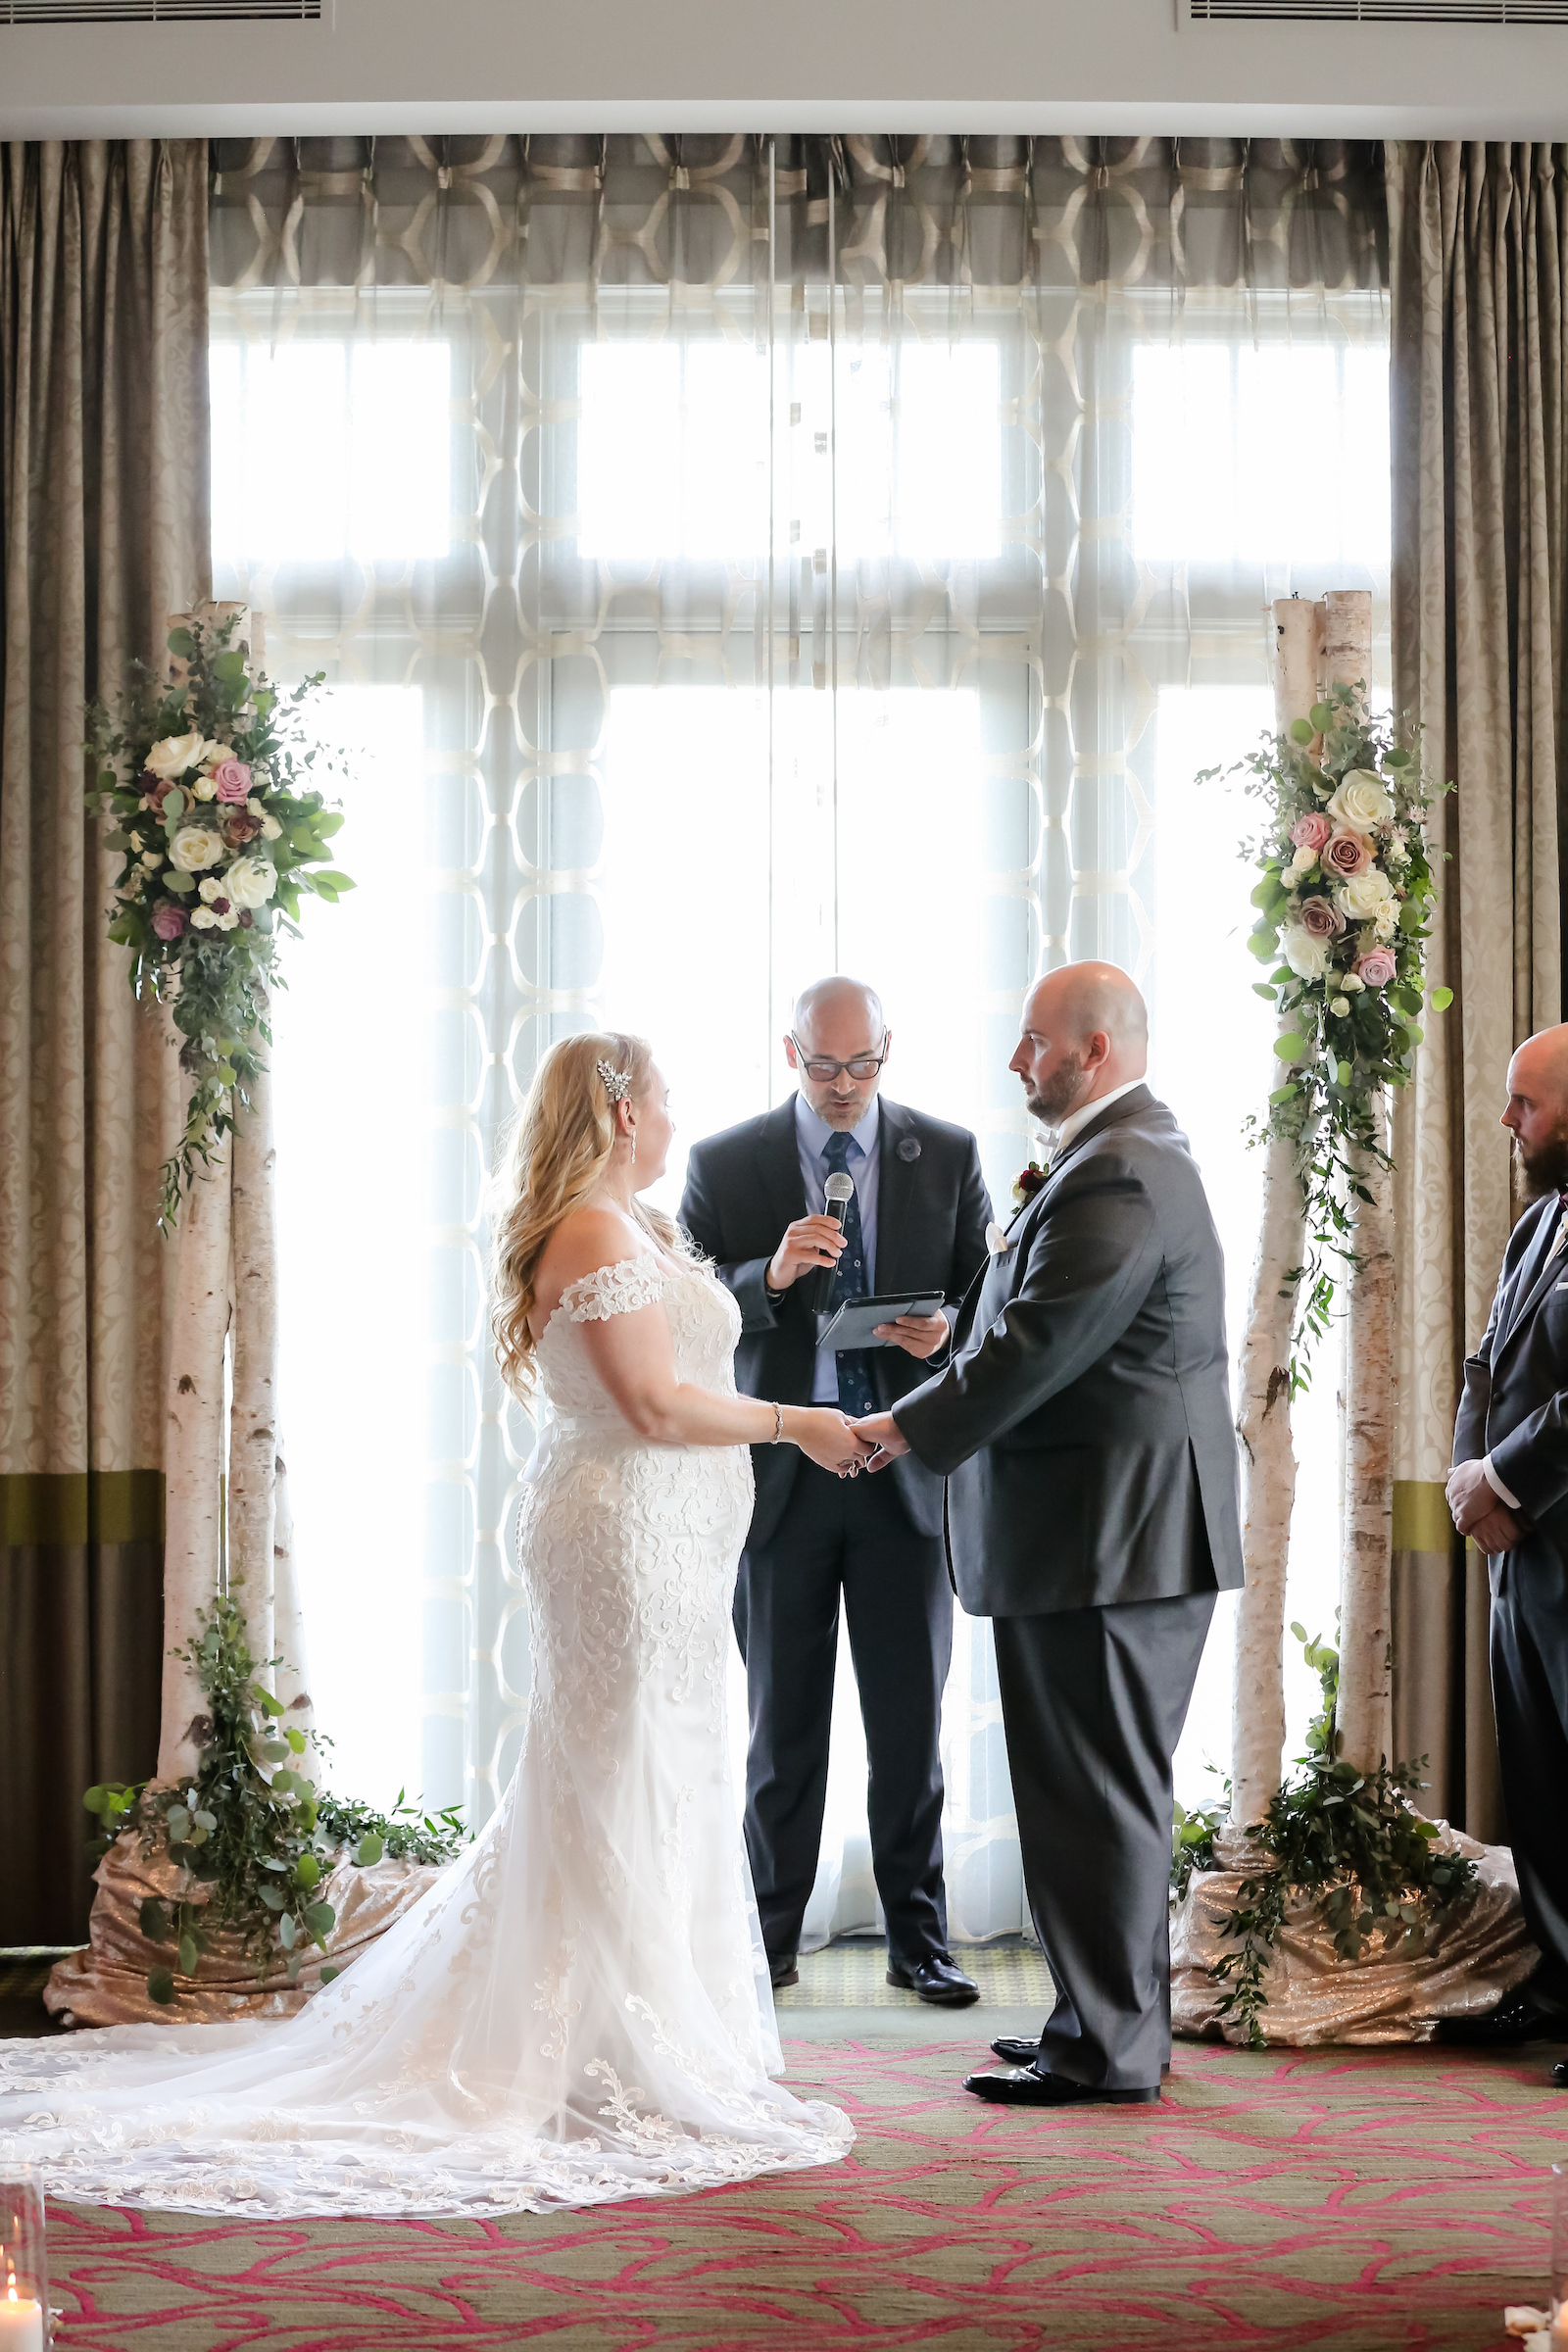 Classic Bride and Groom Exchanging Wedding Vows During Ballroom Ceremony, Birch Wooden Stands with Floral Arrangements | Tampa Bay Wedding Planner Kelly Kennedy Weddings and Events | St. Pete Wedding Venue The Birchwood | Wedding Photographer Lifelong Photography Studio